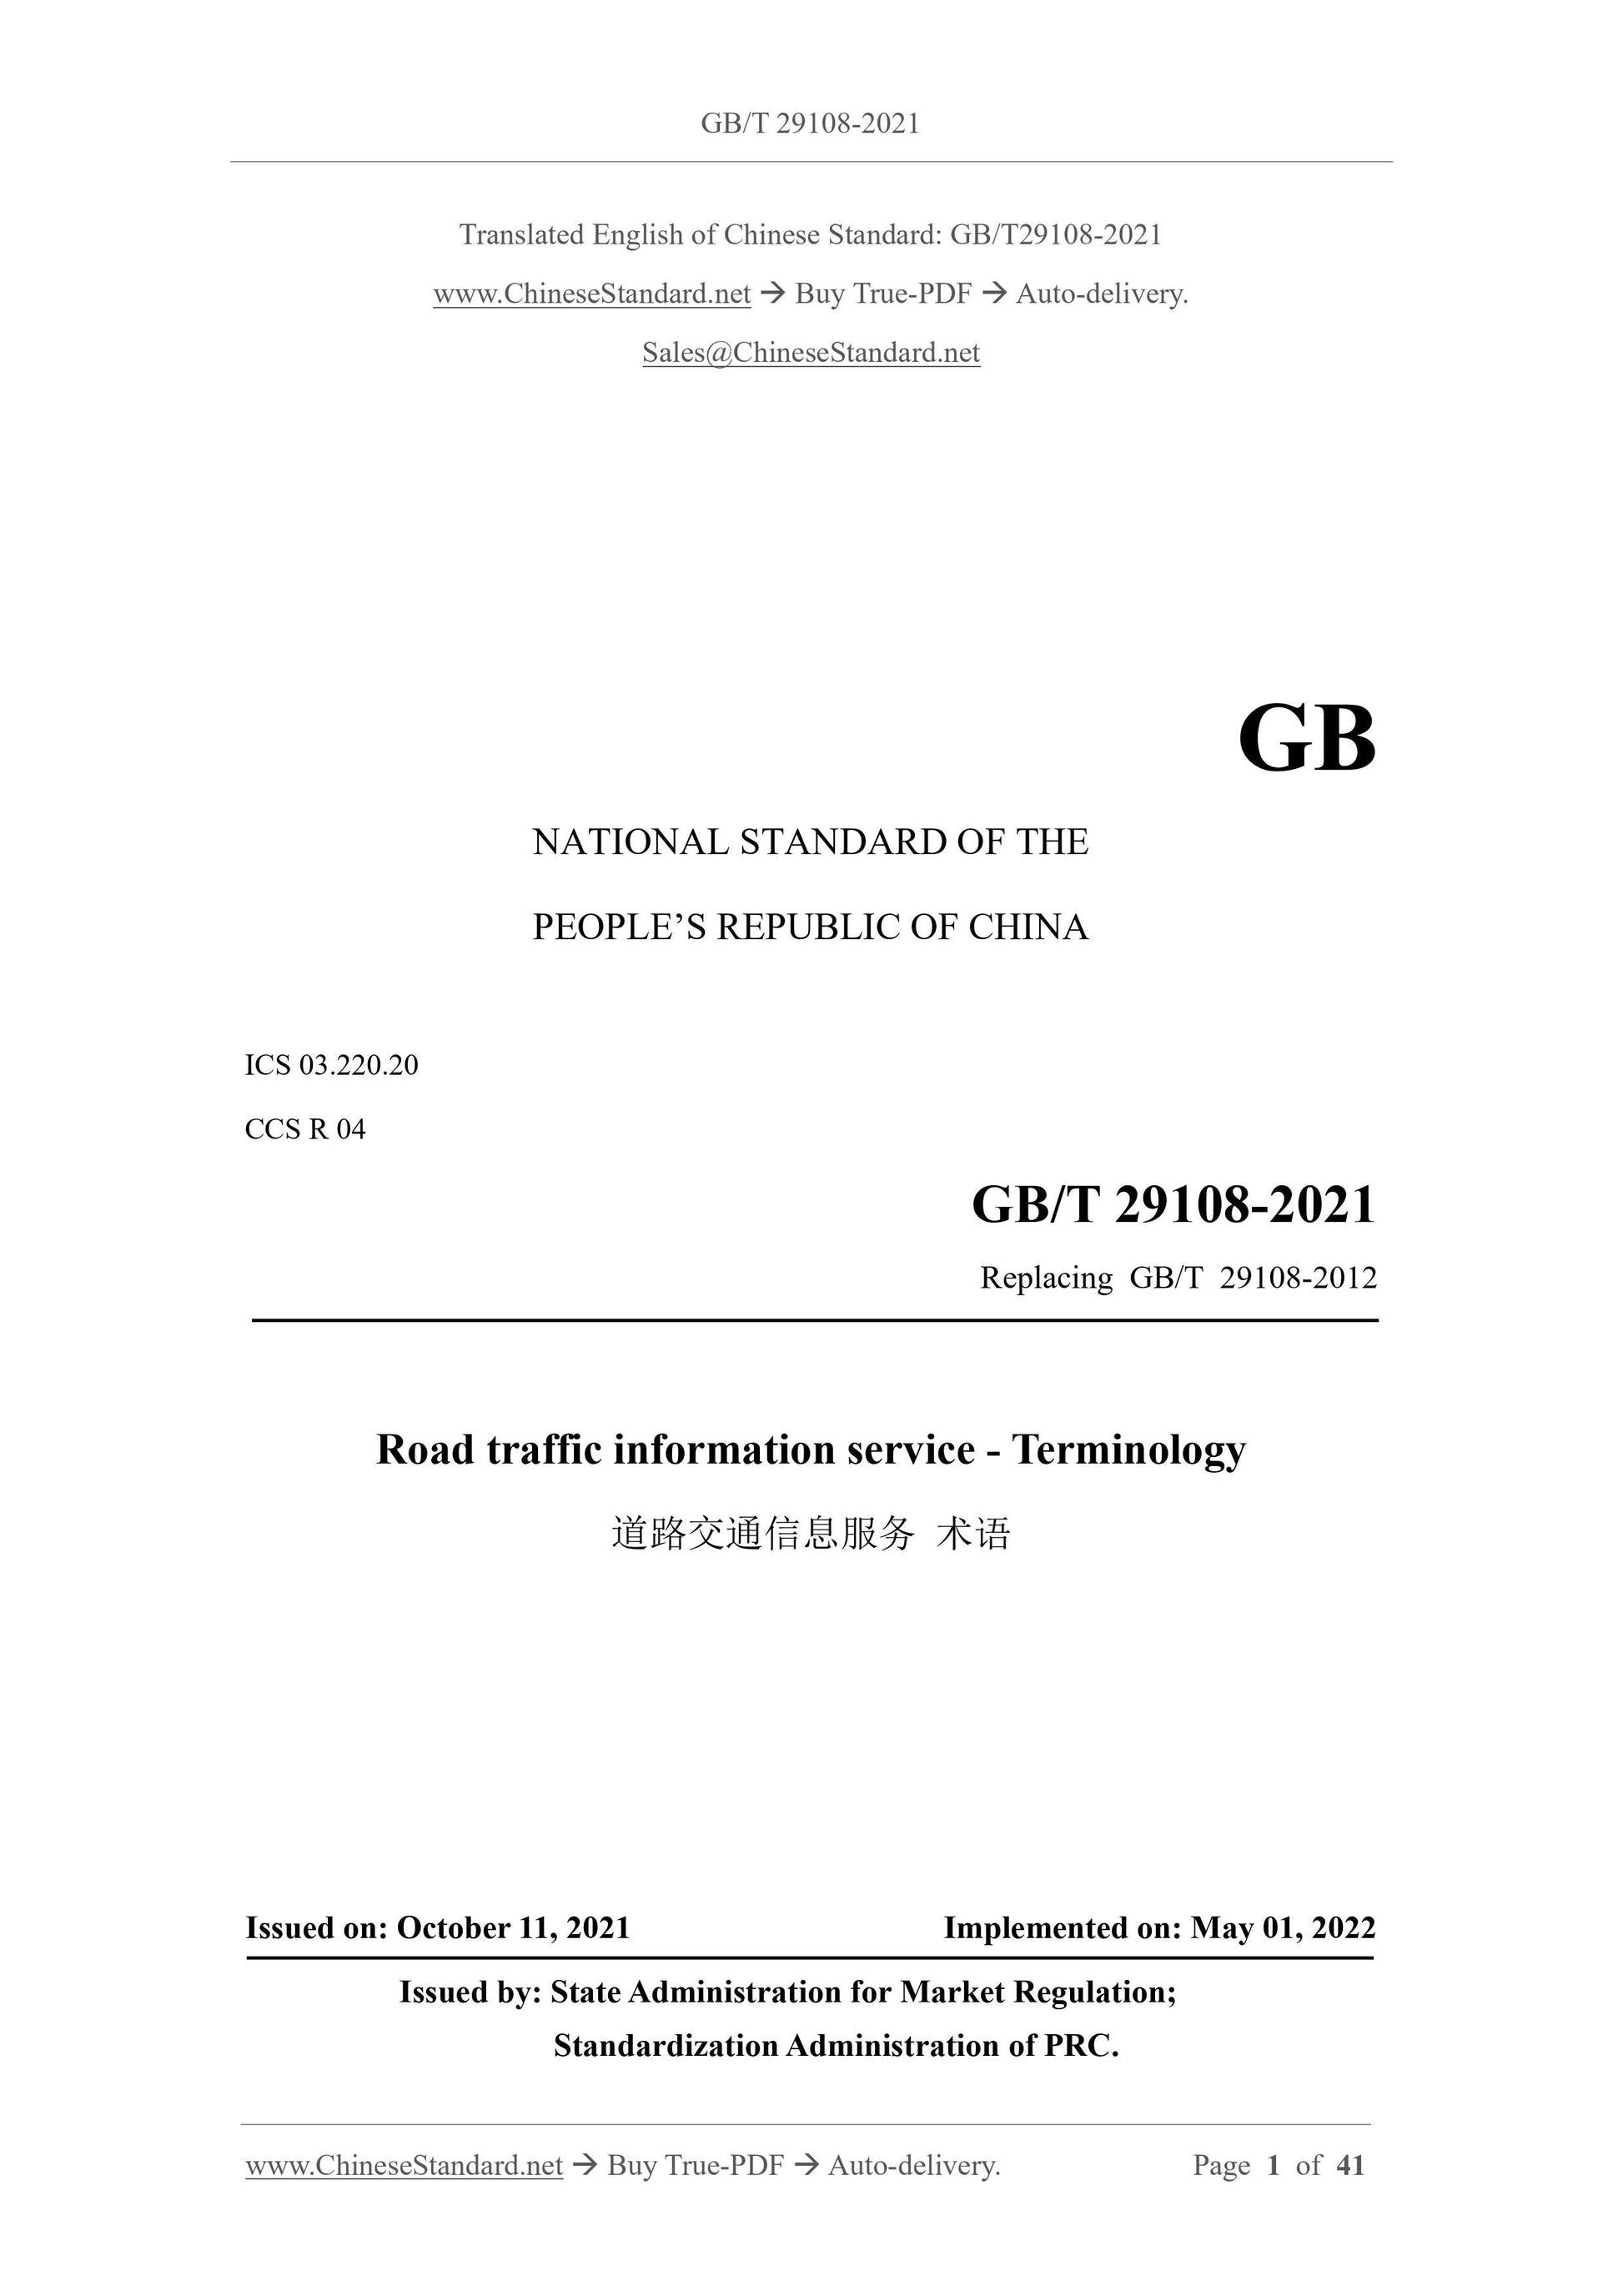 GB/T 29108-2021 Page 1